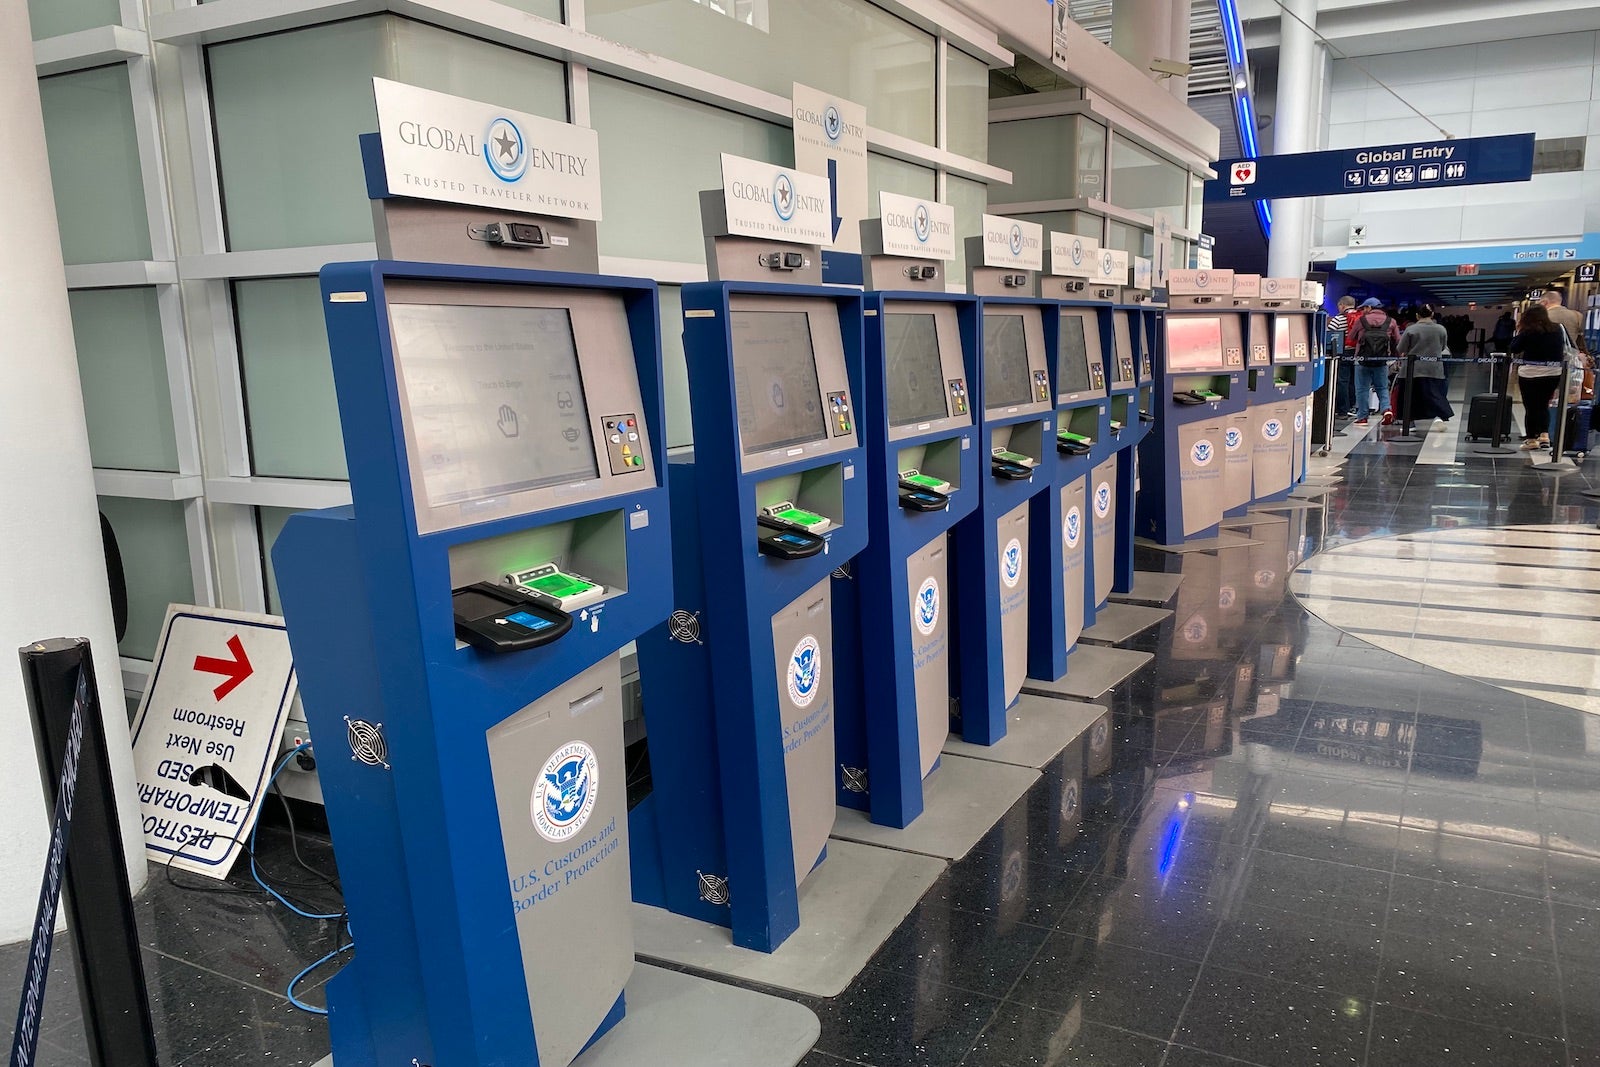 13 things you need to know about Global Entry